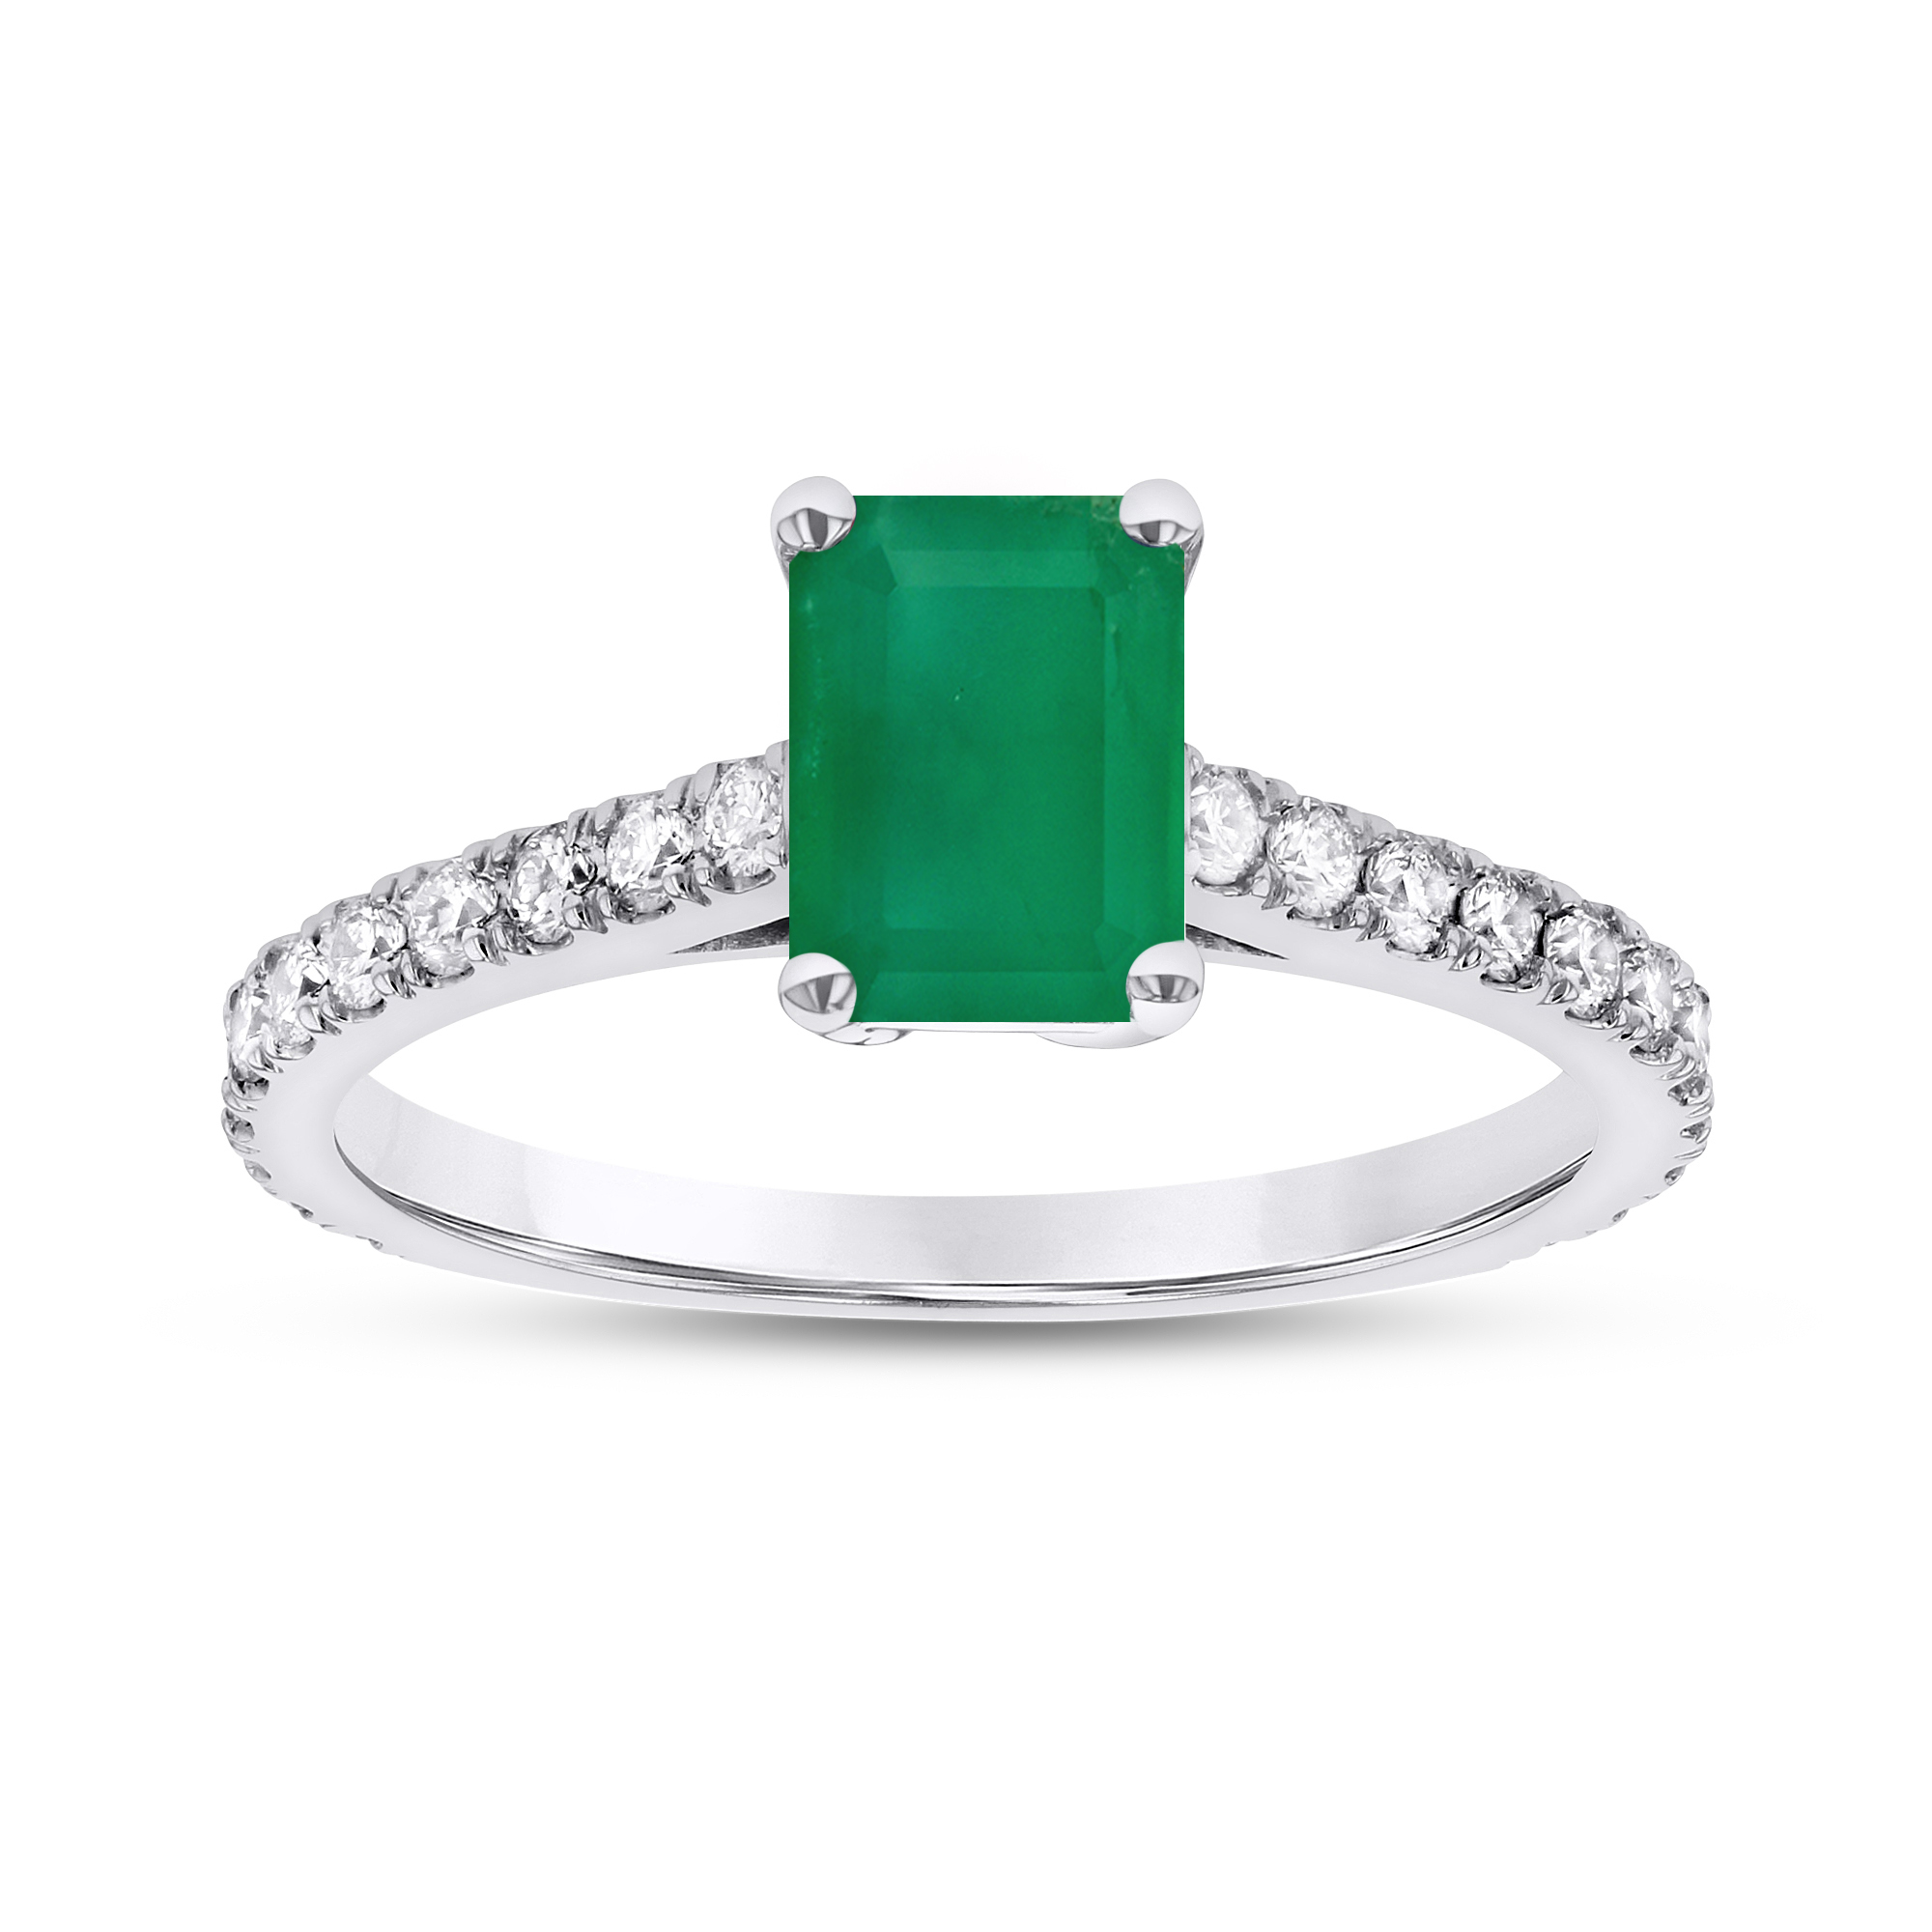 0.36ctw Diamond and Emerald Cut Emerald Engagement Ring in 14k White Gold